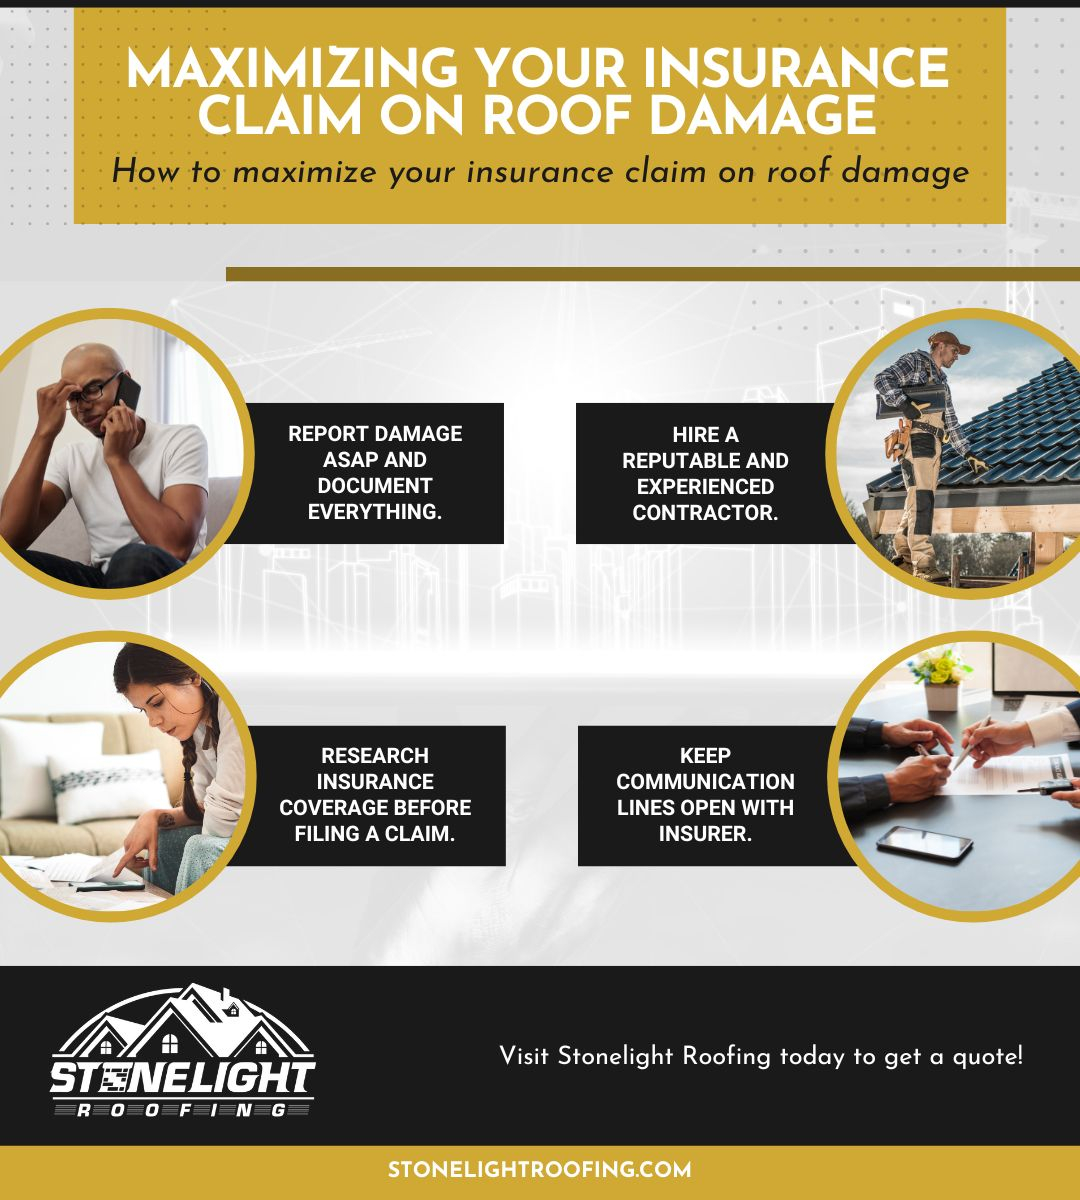 M37913 - Stonelight Roofing - Insurance Claims .jpg